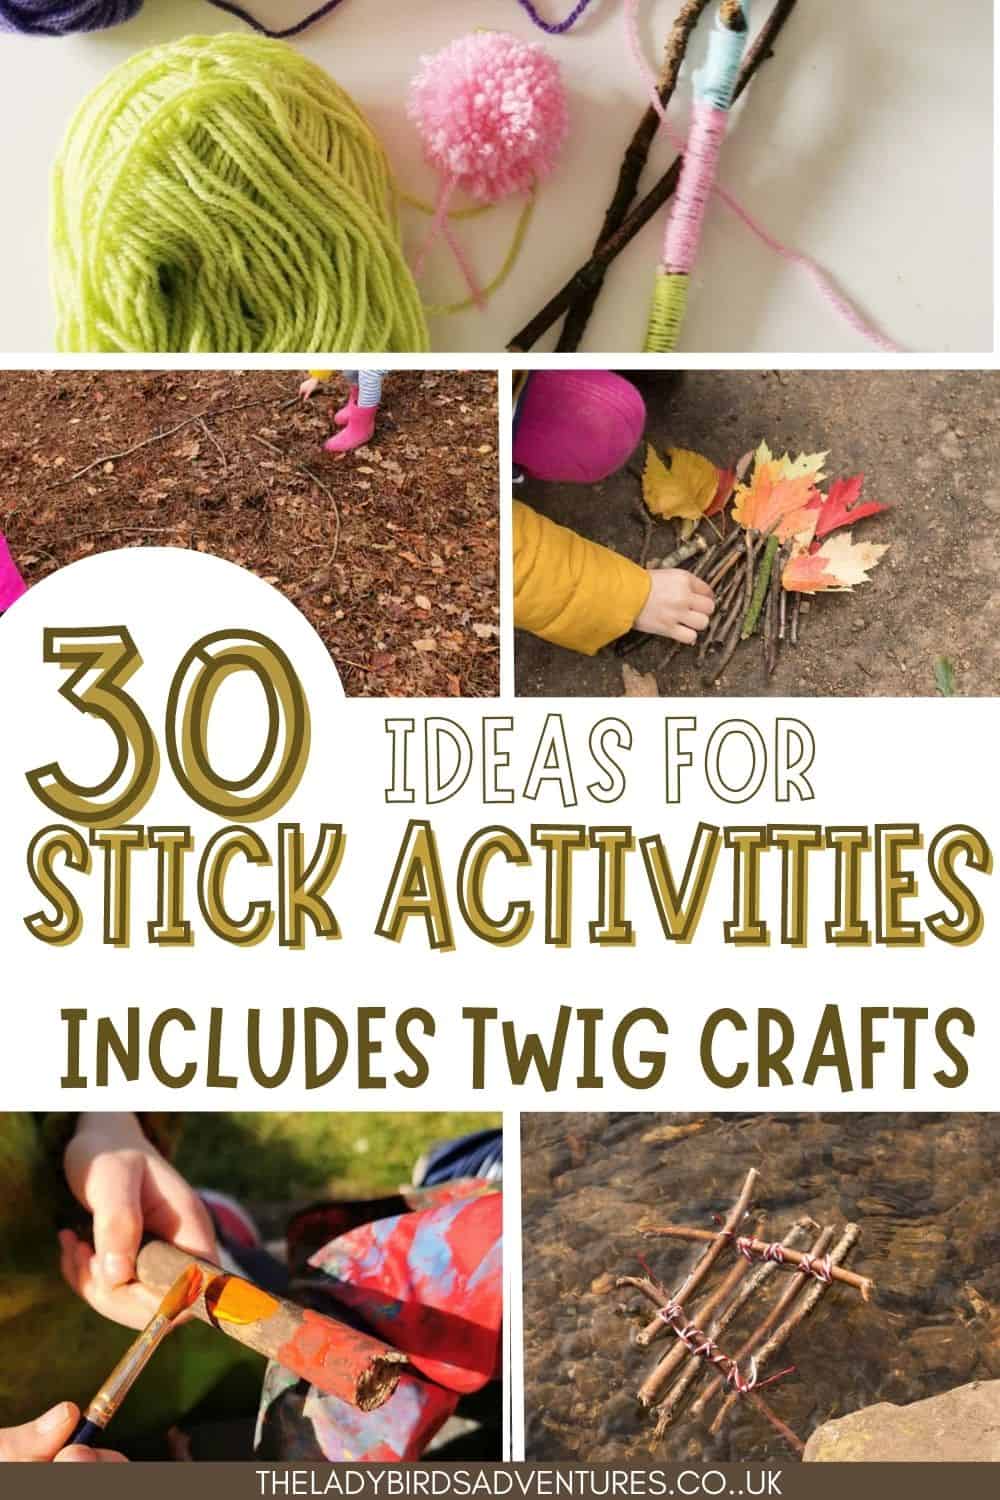 Photos of stick activities and crafts. Text reads 30 ideas for stick activities including twig crafts